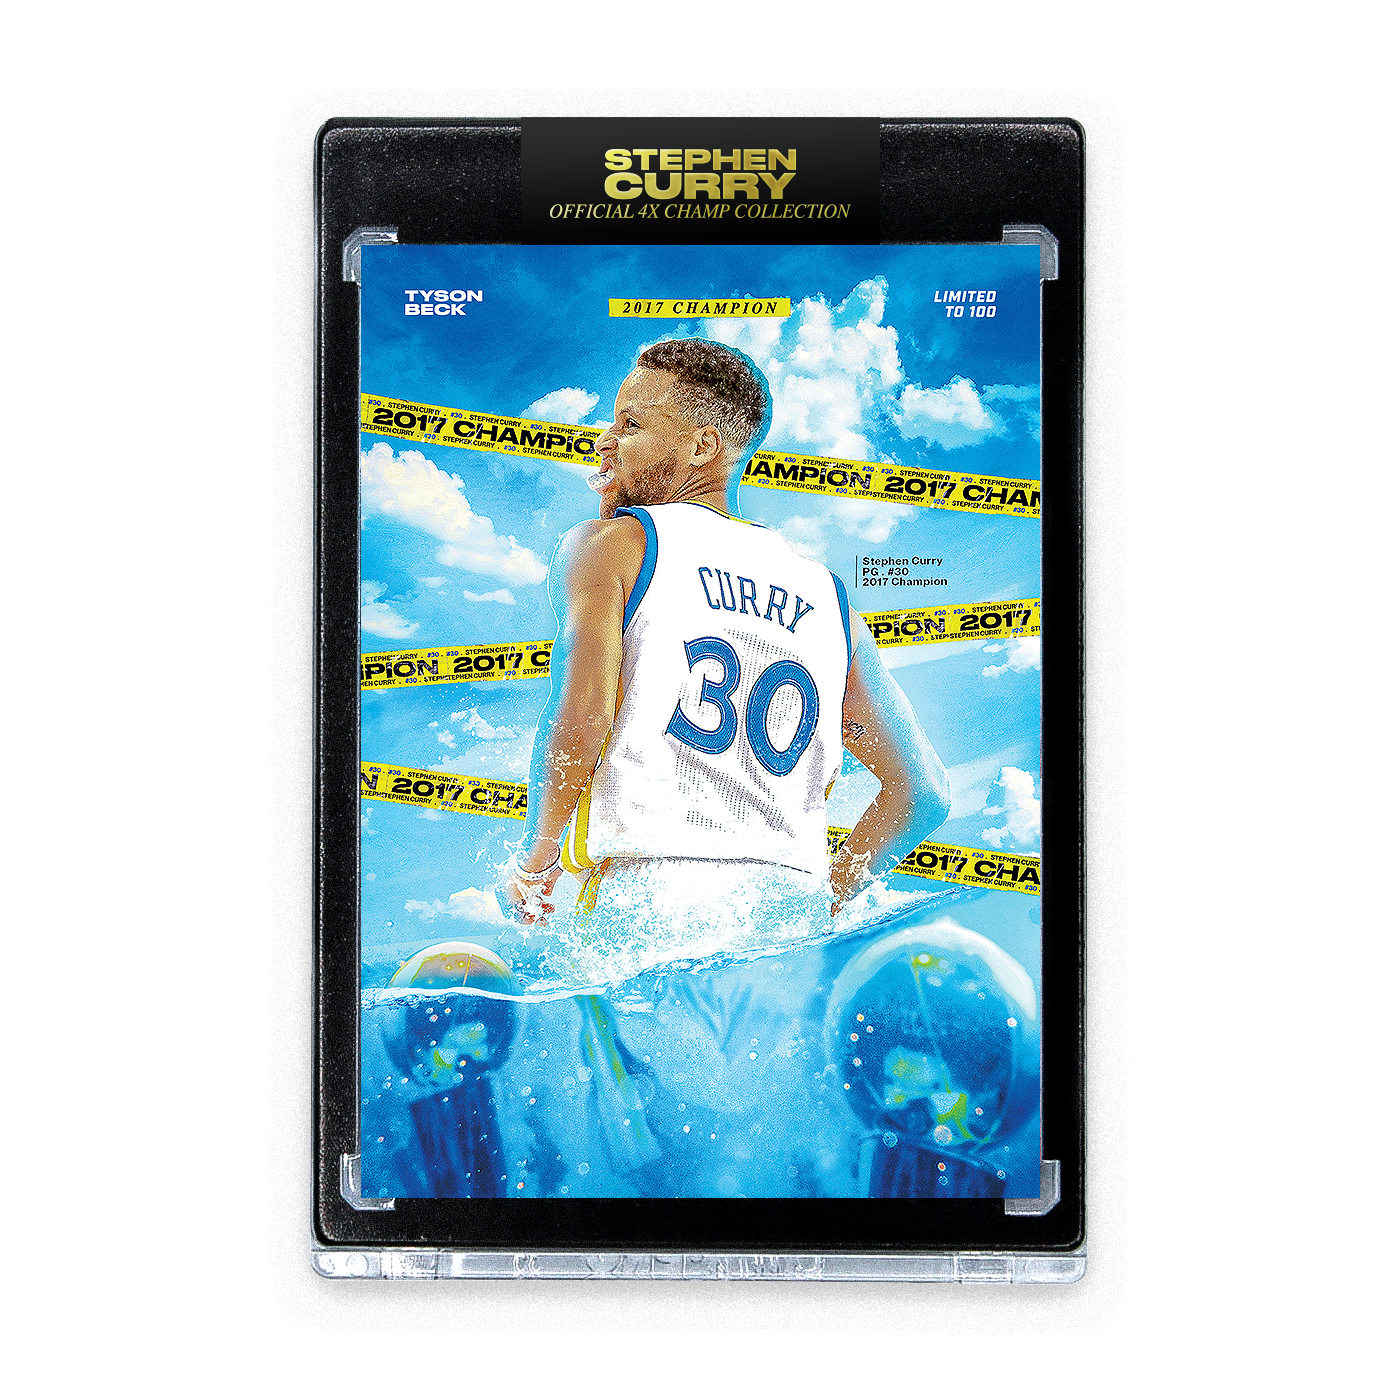 STEPHEN CURRY X TYSON BECK - 2017 CHAMP - LIMITED TO 100